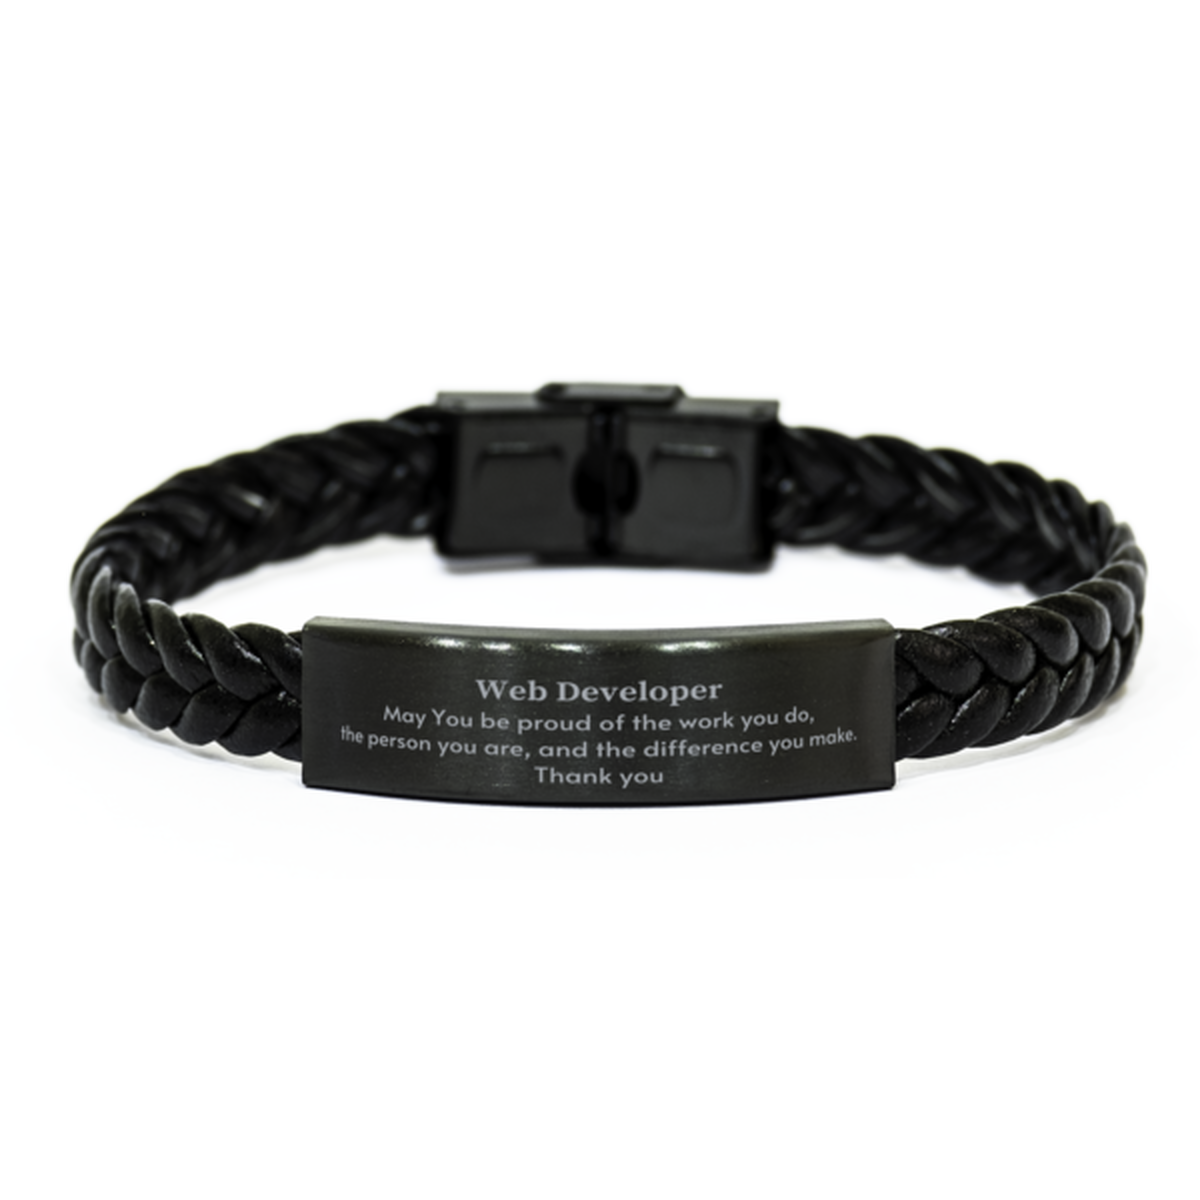 Heartwarming Braided Leather Bracelet Retirement Coworkers Gifts for Web Developer, Web Developer May You be proud of the work you do, the person you are Gifts for Boss Men Women Friends